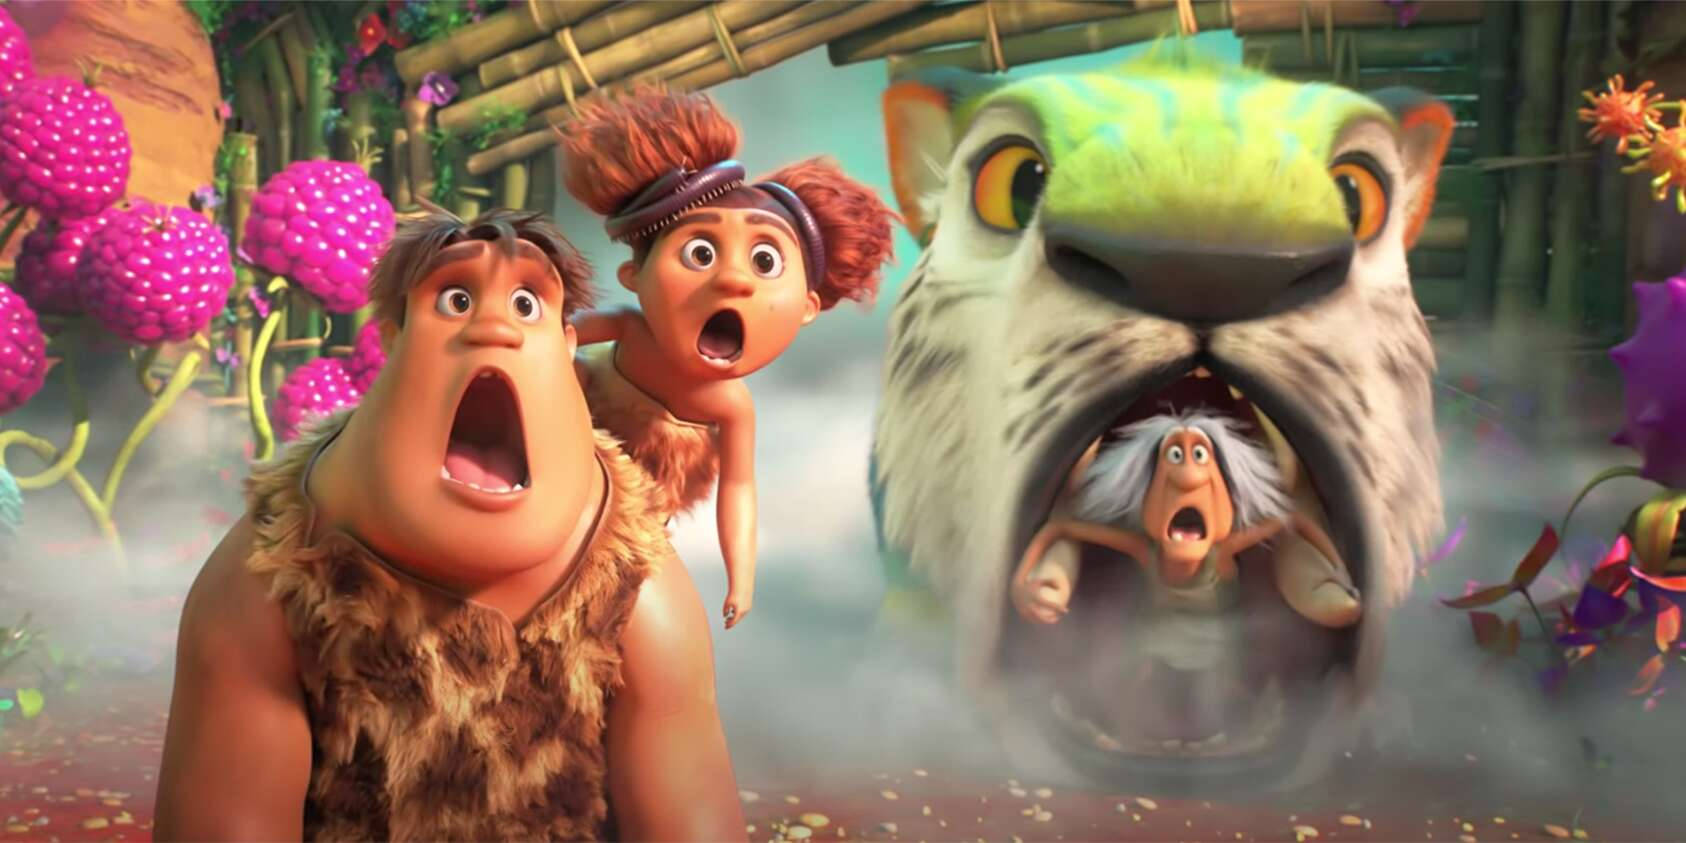 Shocked The Croods Family Members Wallpaper